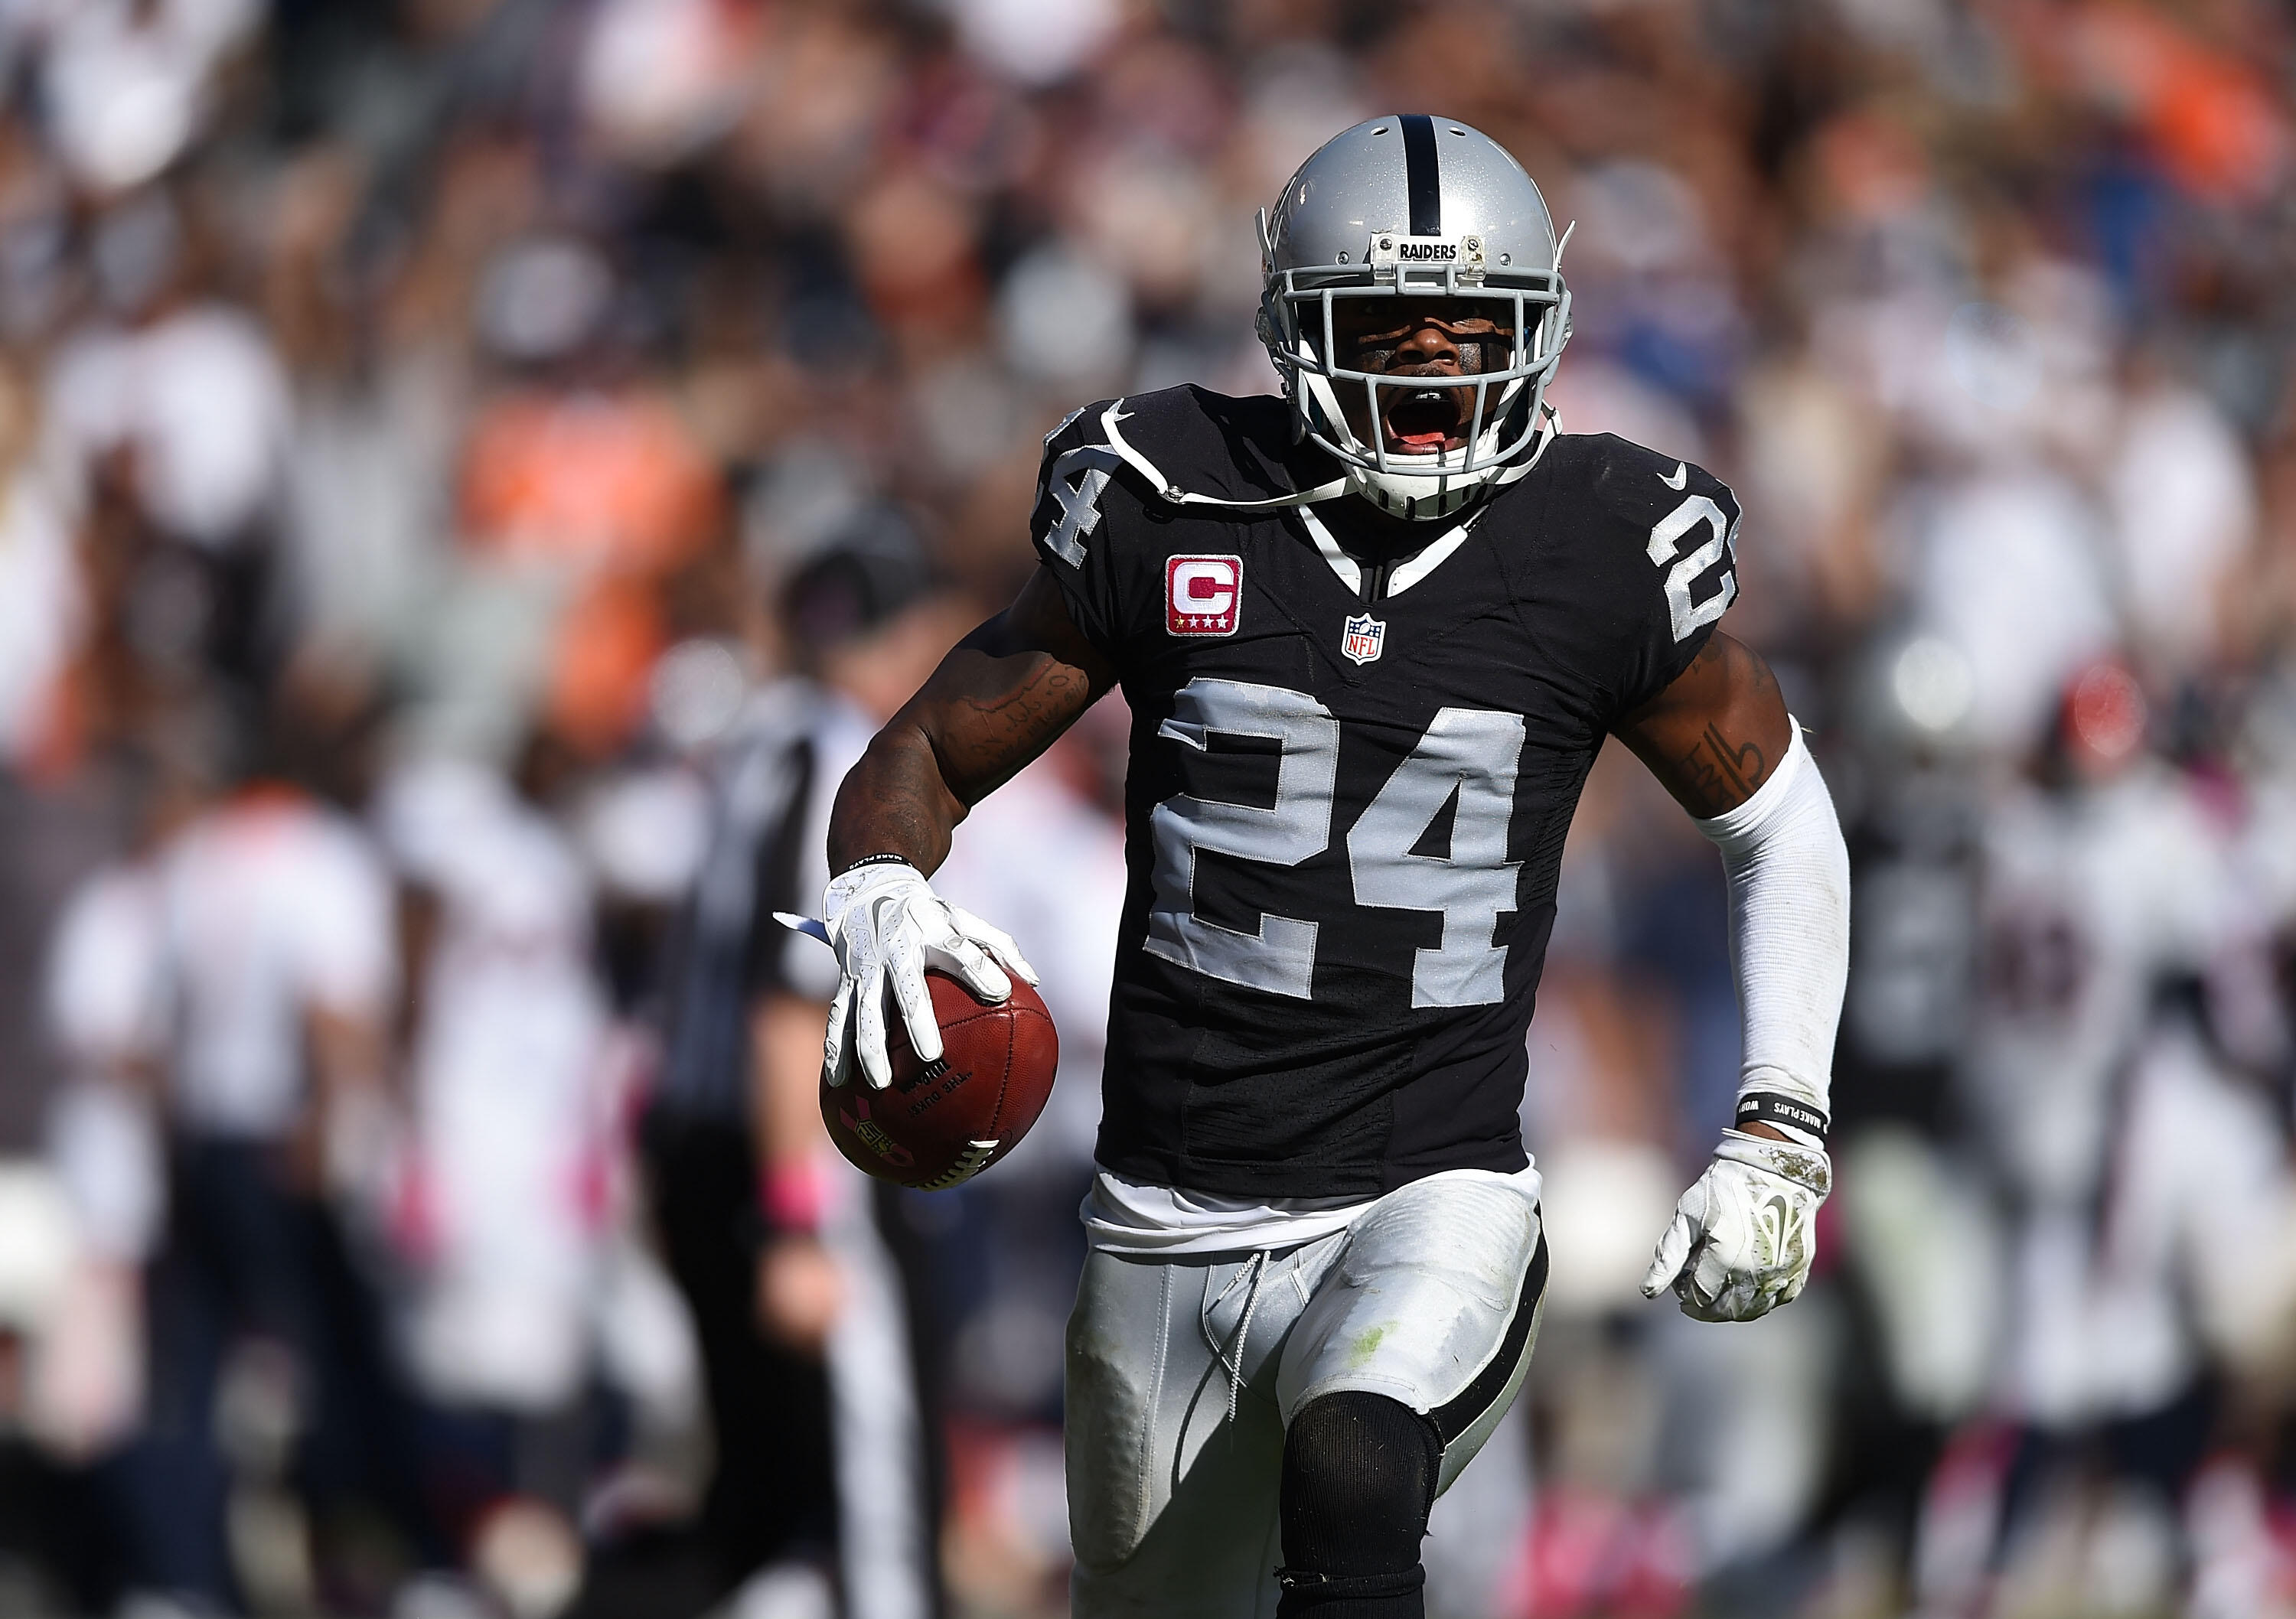 OAKLAND, CA - OCTOBER 11:  Charles Woodson #24 of the Oakland Raiders celebrates an interception against the Denver Broncos in the third quarter at O.co Coliseum on October 11, 2015 in Oakland, California.  (Photo by Thearon W. Henderson/Getty Images)